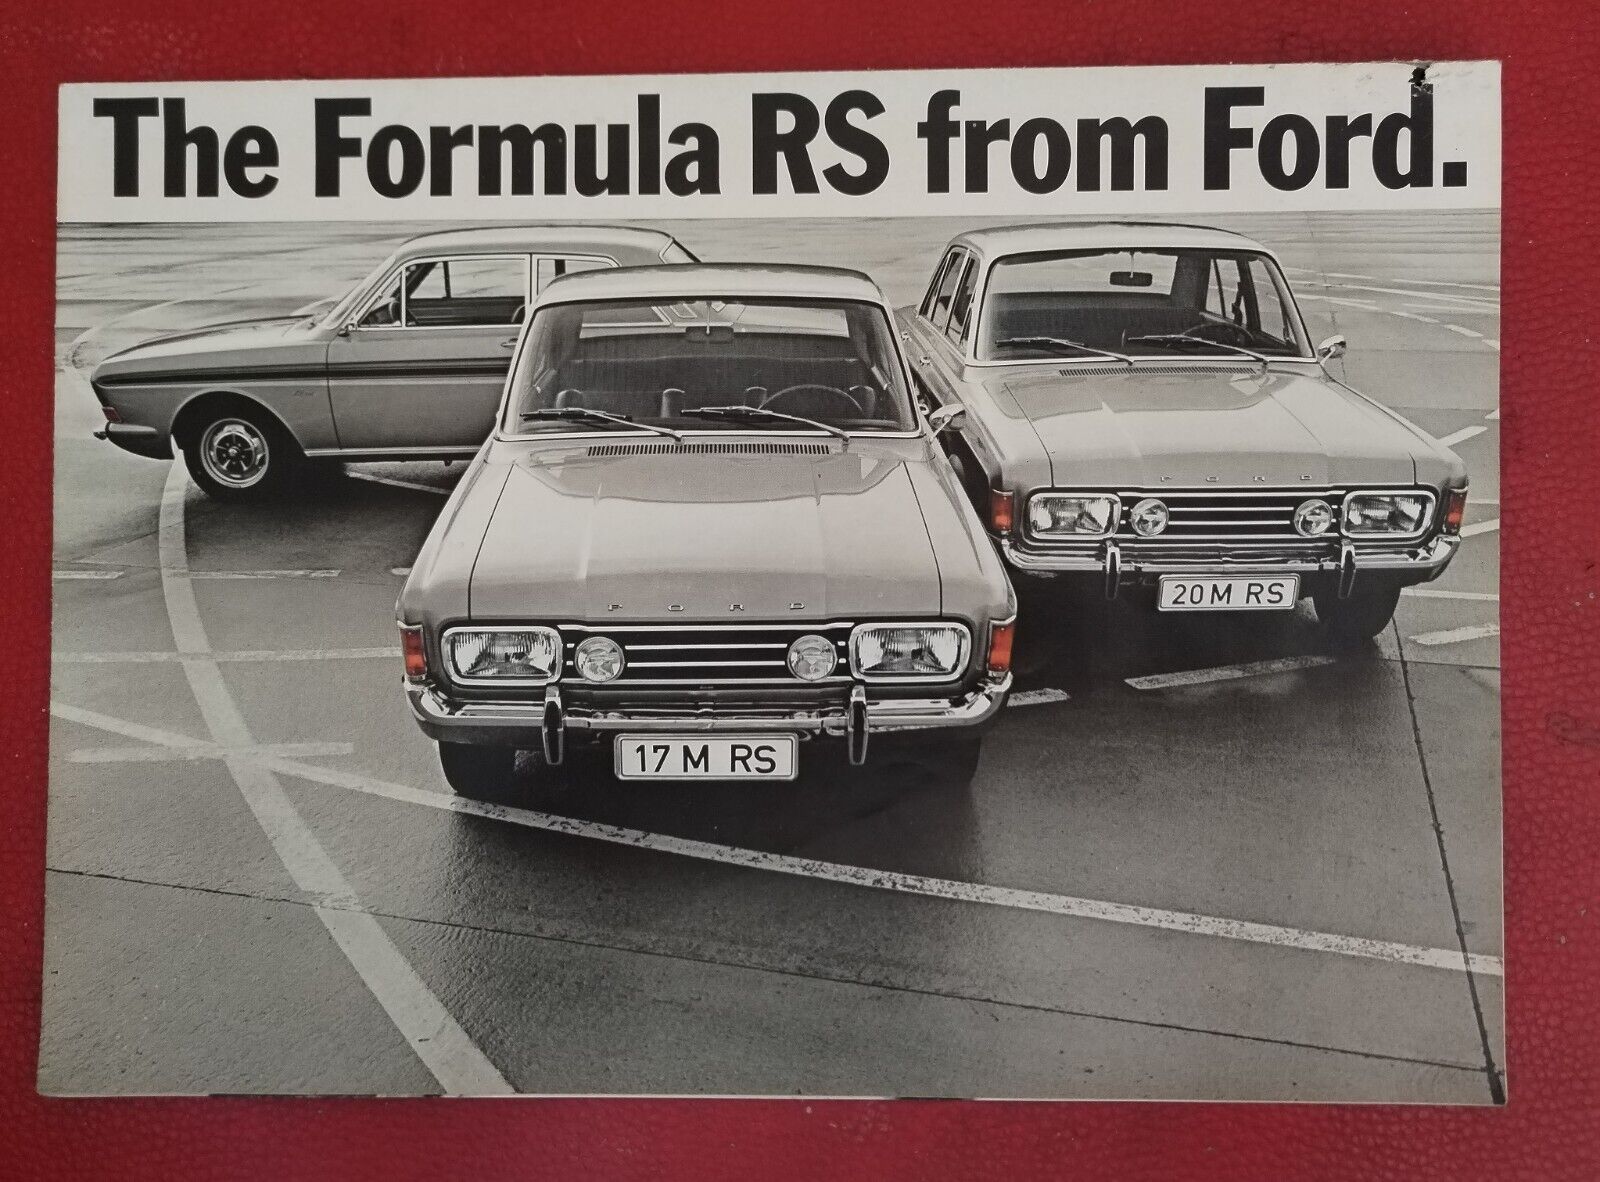 Ford RS 15M 17M 20M Brochure from 1969 Formula RS